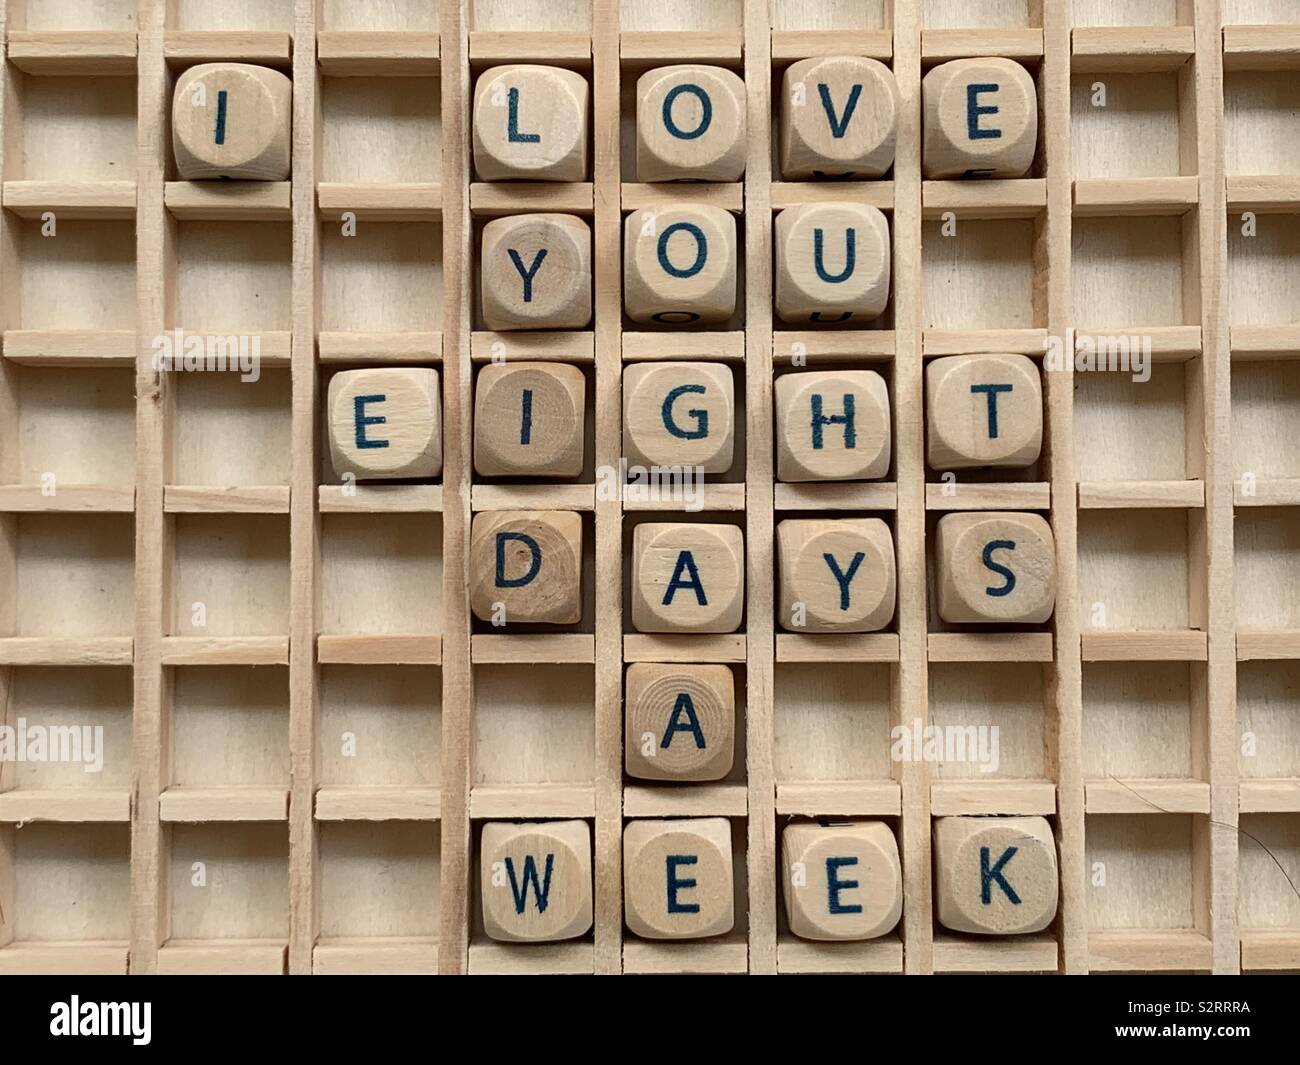 I love you eight days a week, declaration composed with wooden cube dice letters Stock Photo